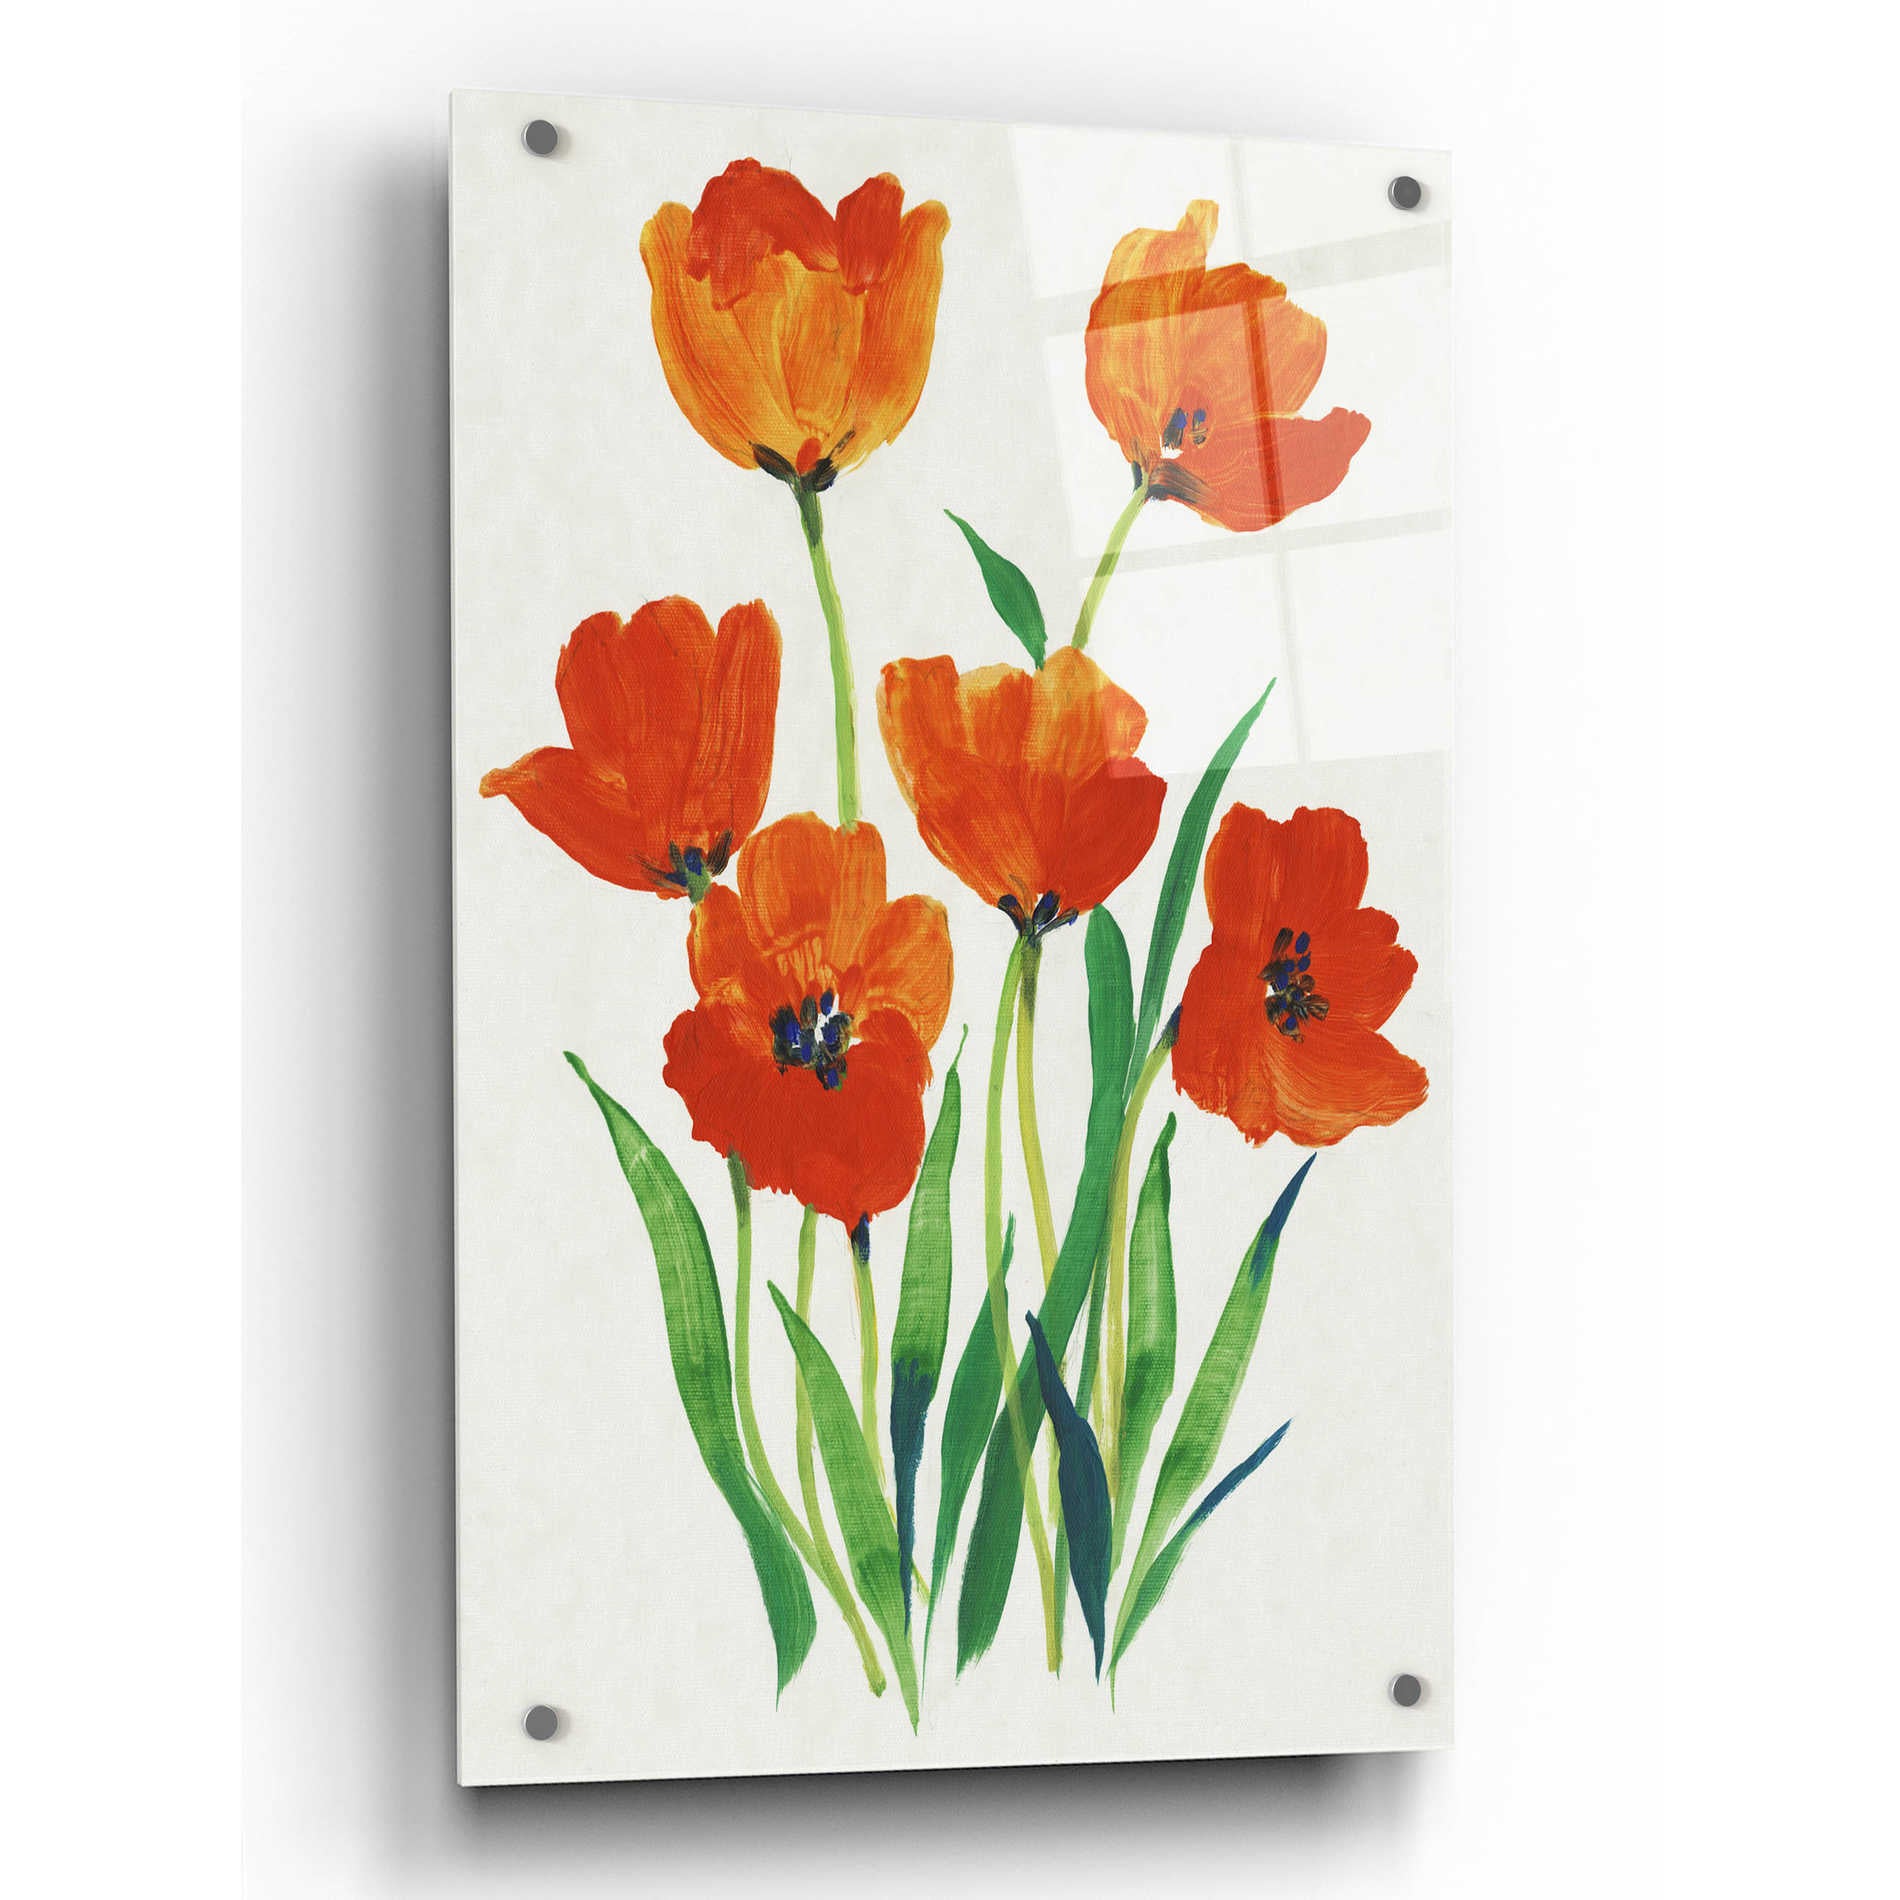 Epic Art 'Red Tulips in Bloom I' by Tim O'Toole, Acrylic Glass Wall Art,24x36